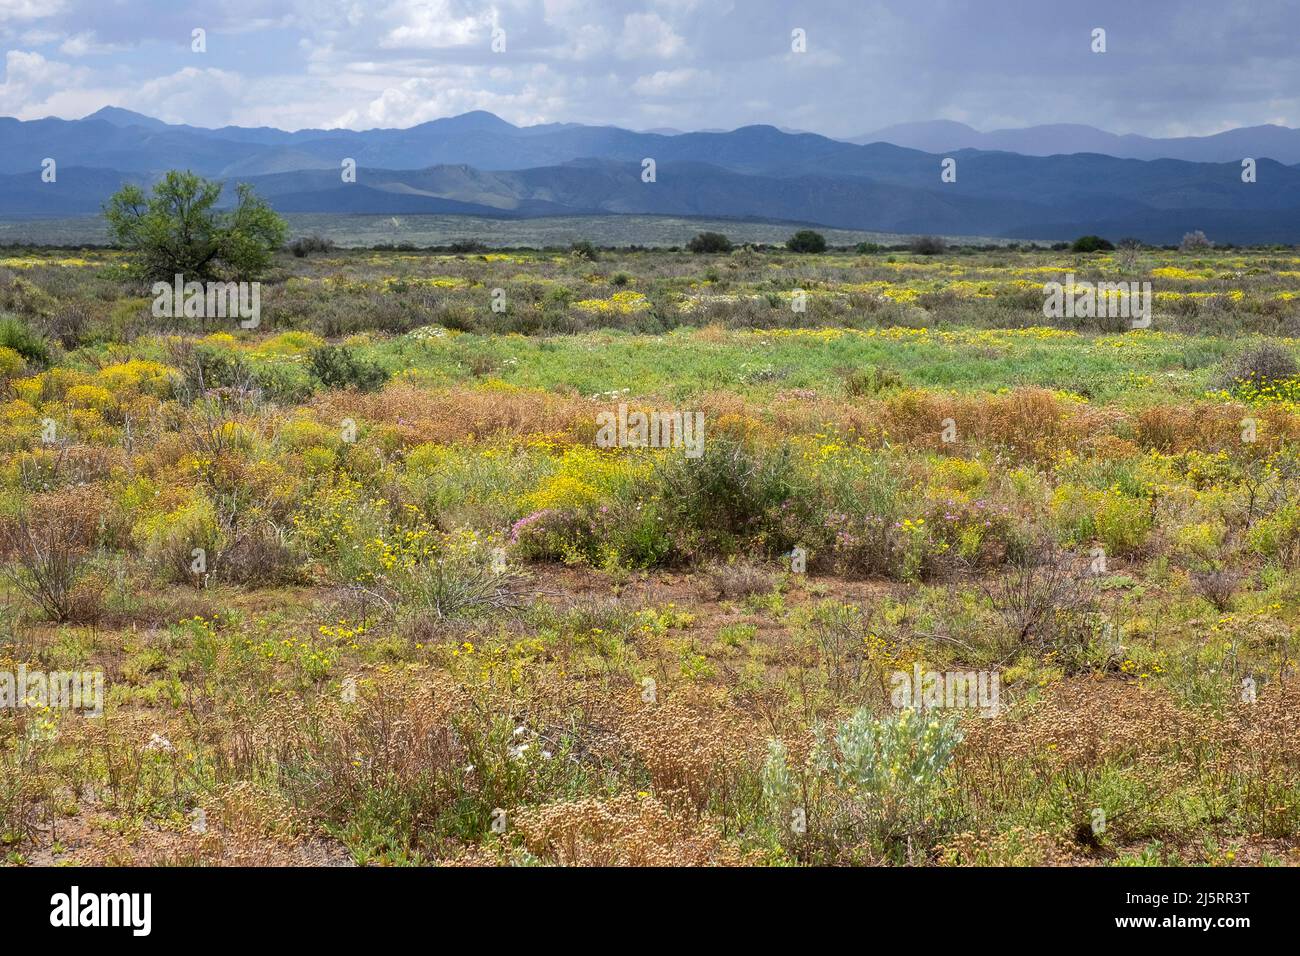 Typical Karoo vegetation along the scenic Route 62 / R62, historical road from Robertson to Oudtshoorn, Western Cape Province, South Africa Stock Photo